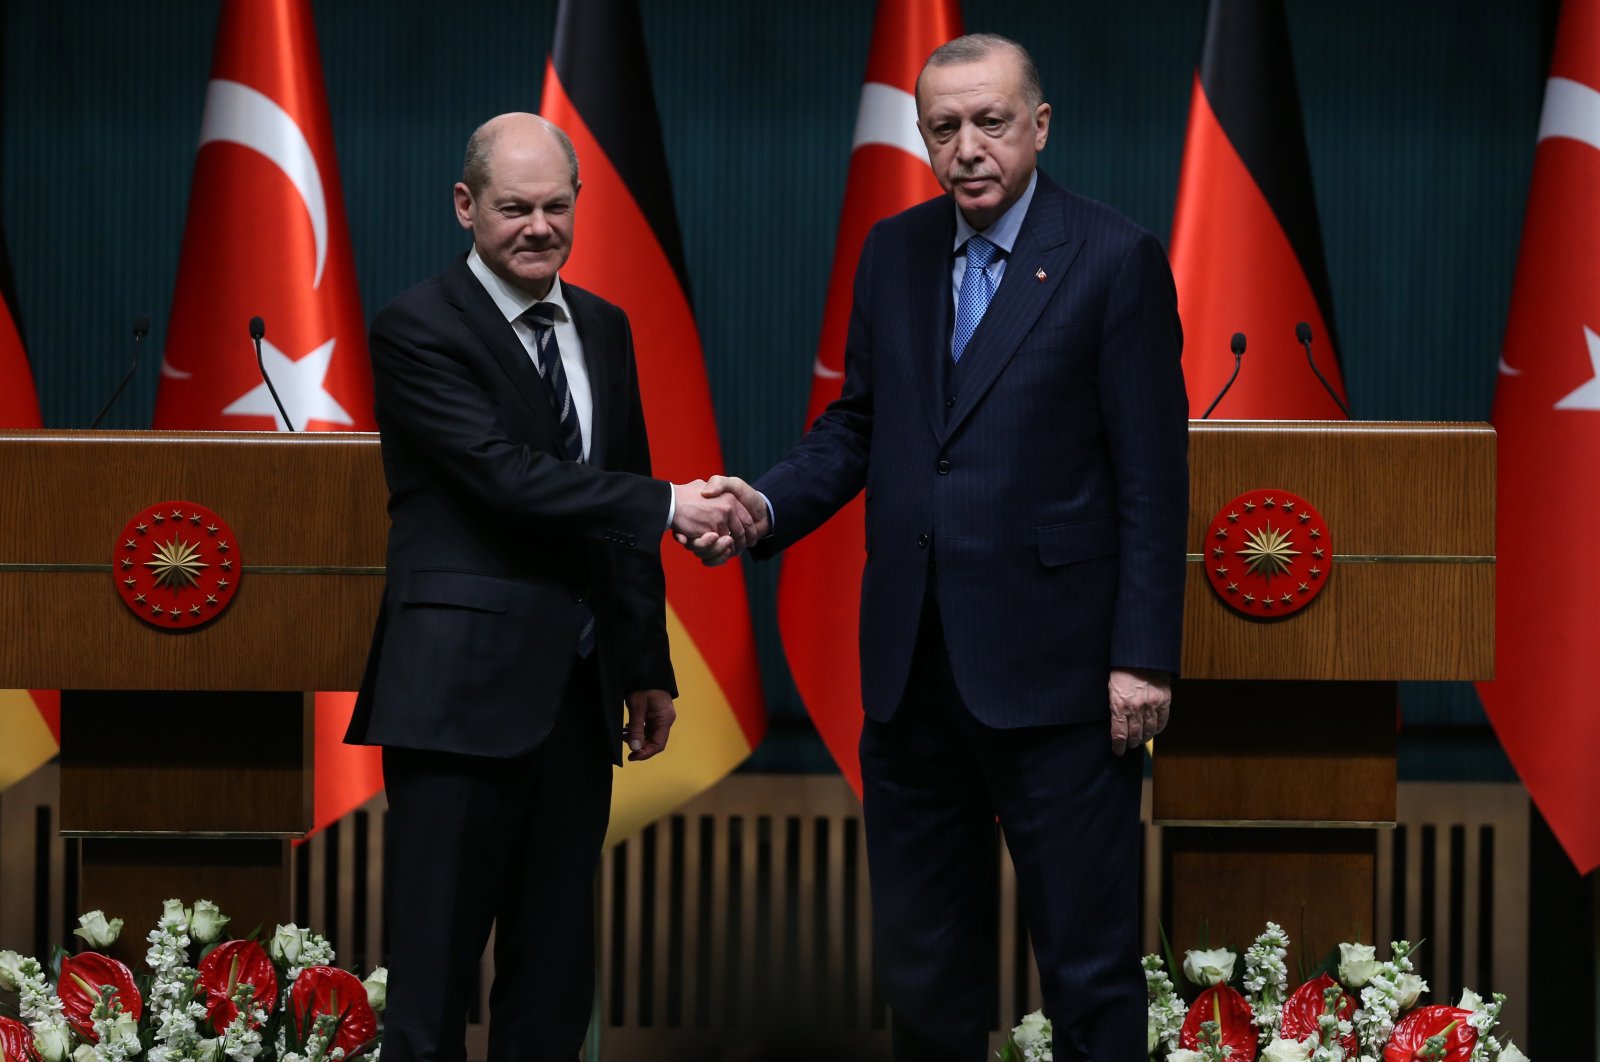 President Recep Tayyip Erdoğan (R) and German Chancellor Olaf Scholz shake hands at the end of their joint press conference following their talks, in Ankara, Turkey, March 14, 2022. (EPA Photo)